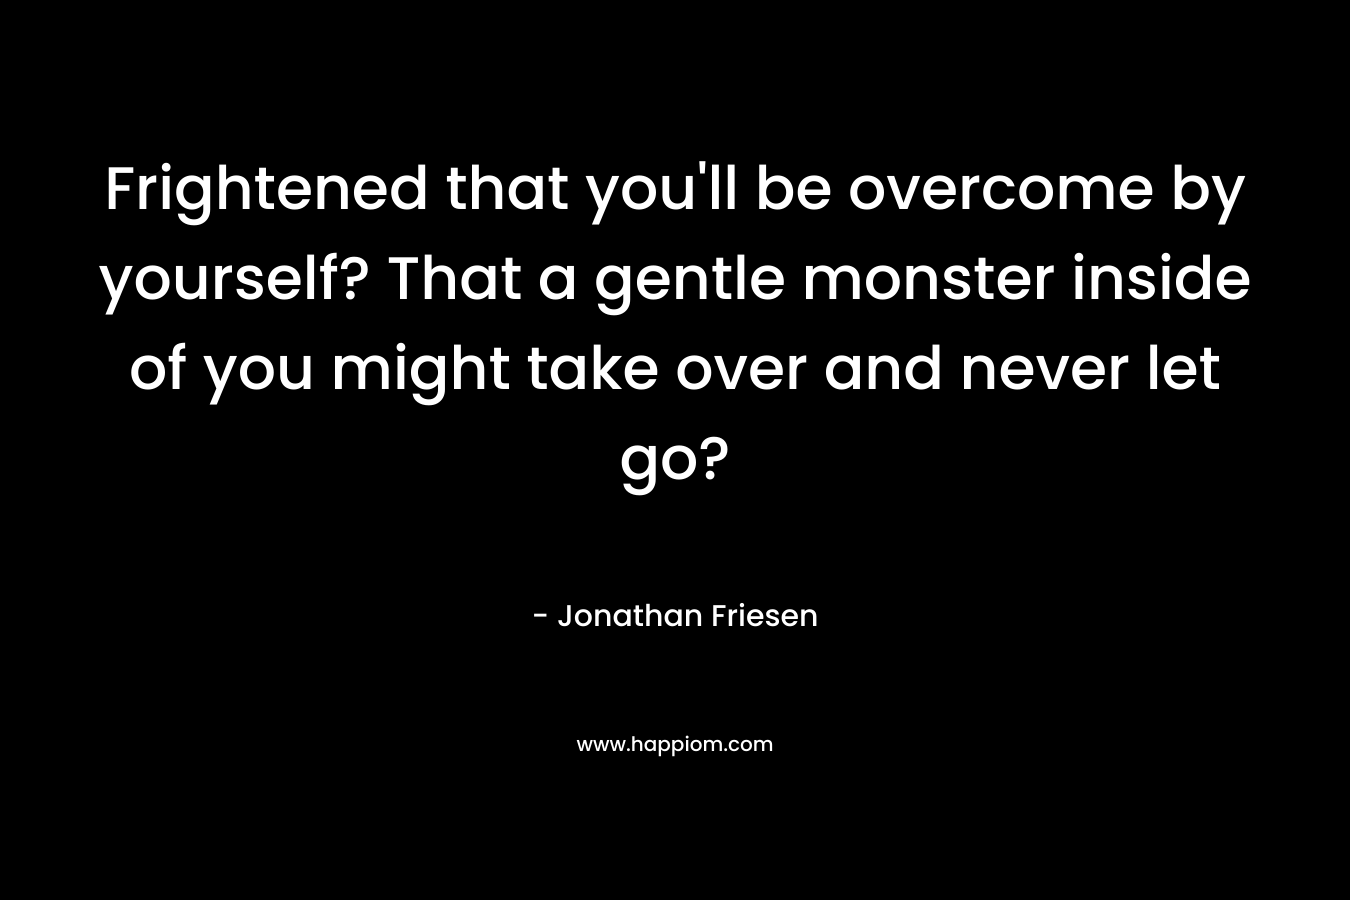 Frightened that you'll be overcome by yourself? That a gentle monster inside of you might take over and never let go?